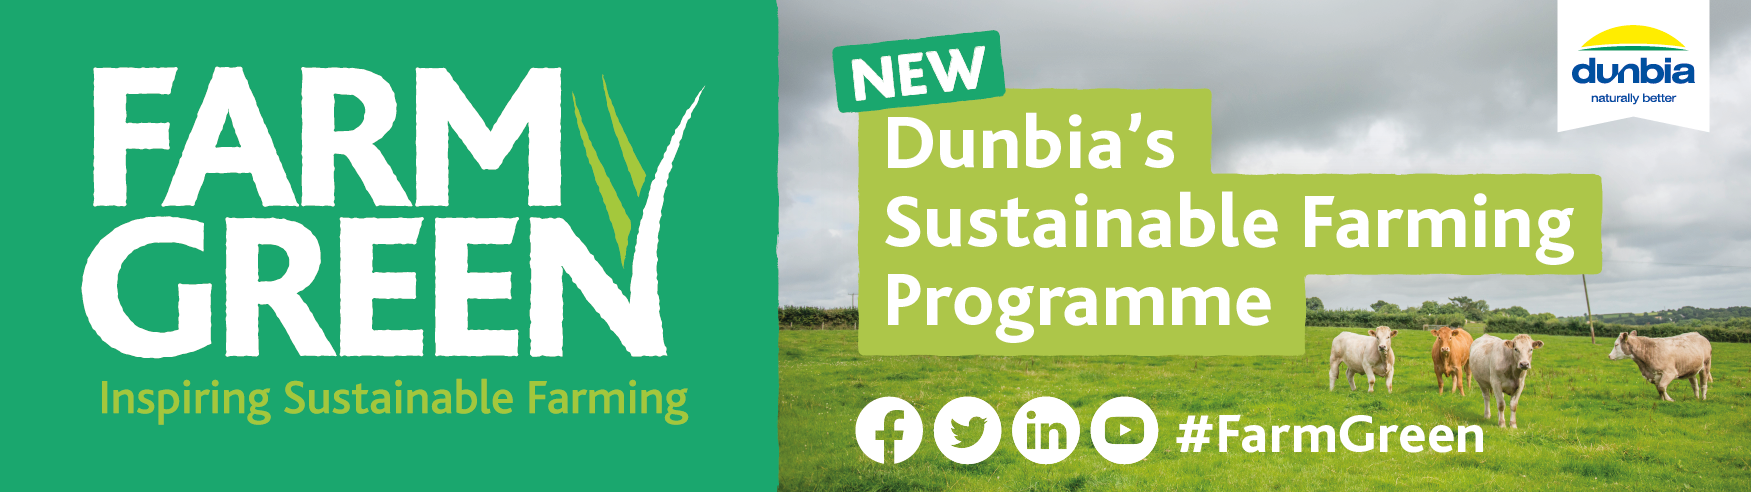 The Launch of Dunbia’s Sustainable Farming Programme – Farm Green 1